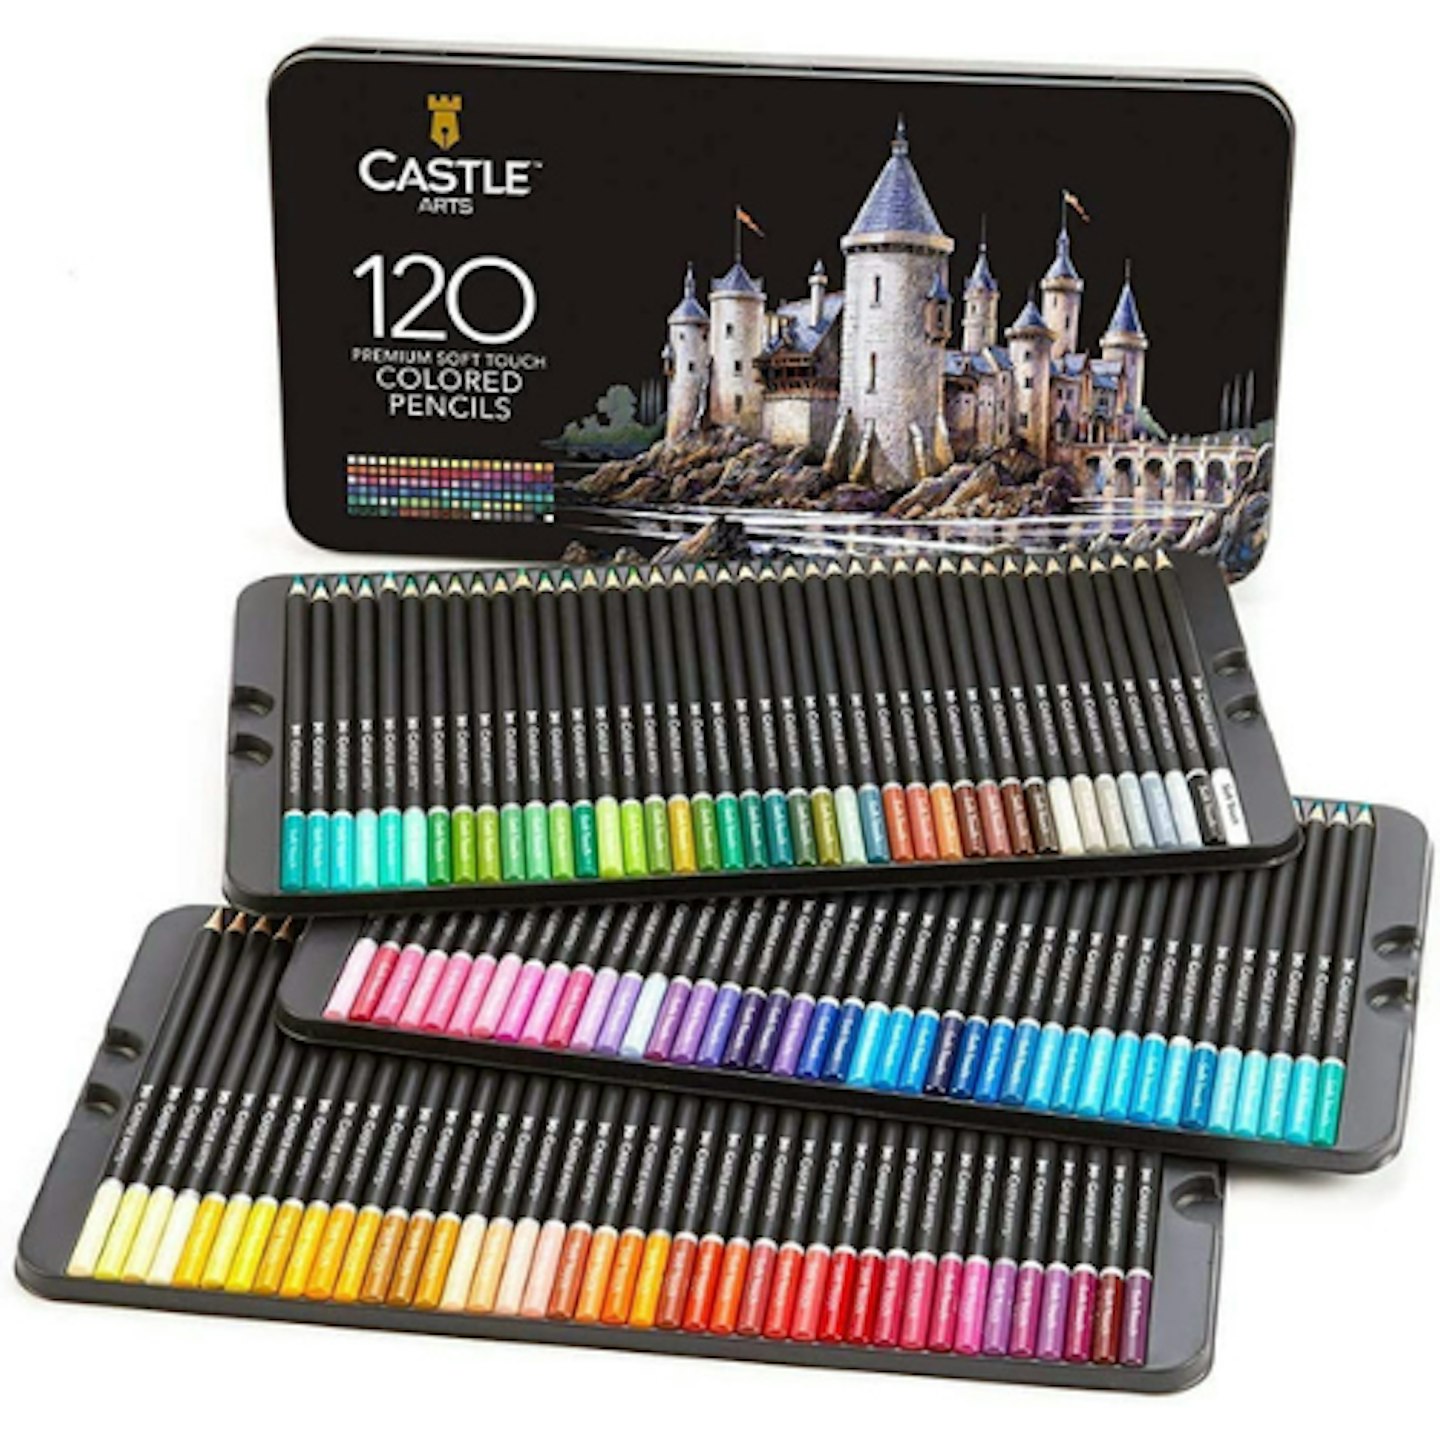 Best Colored Pencils for Adult Coloring Books 